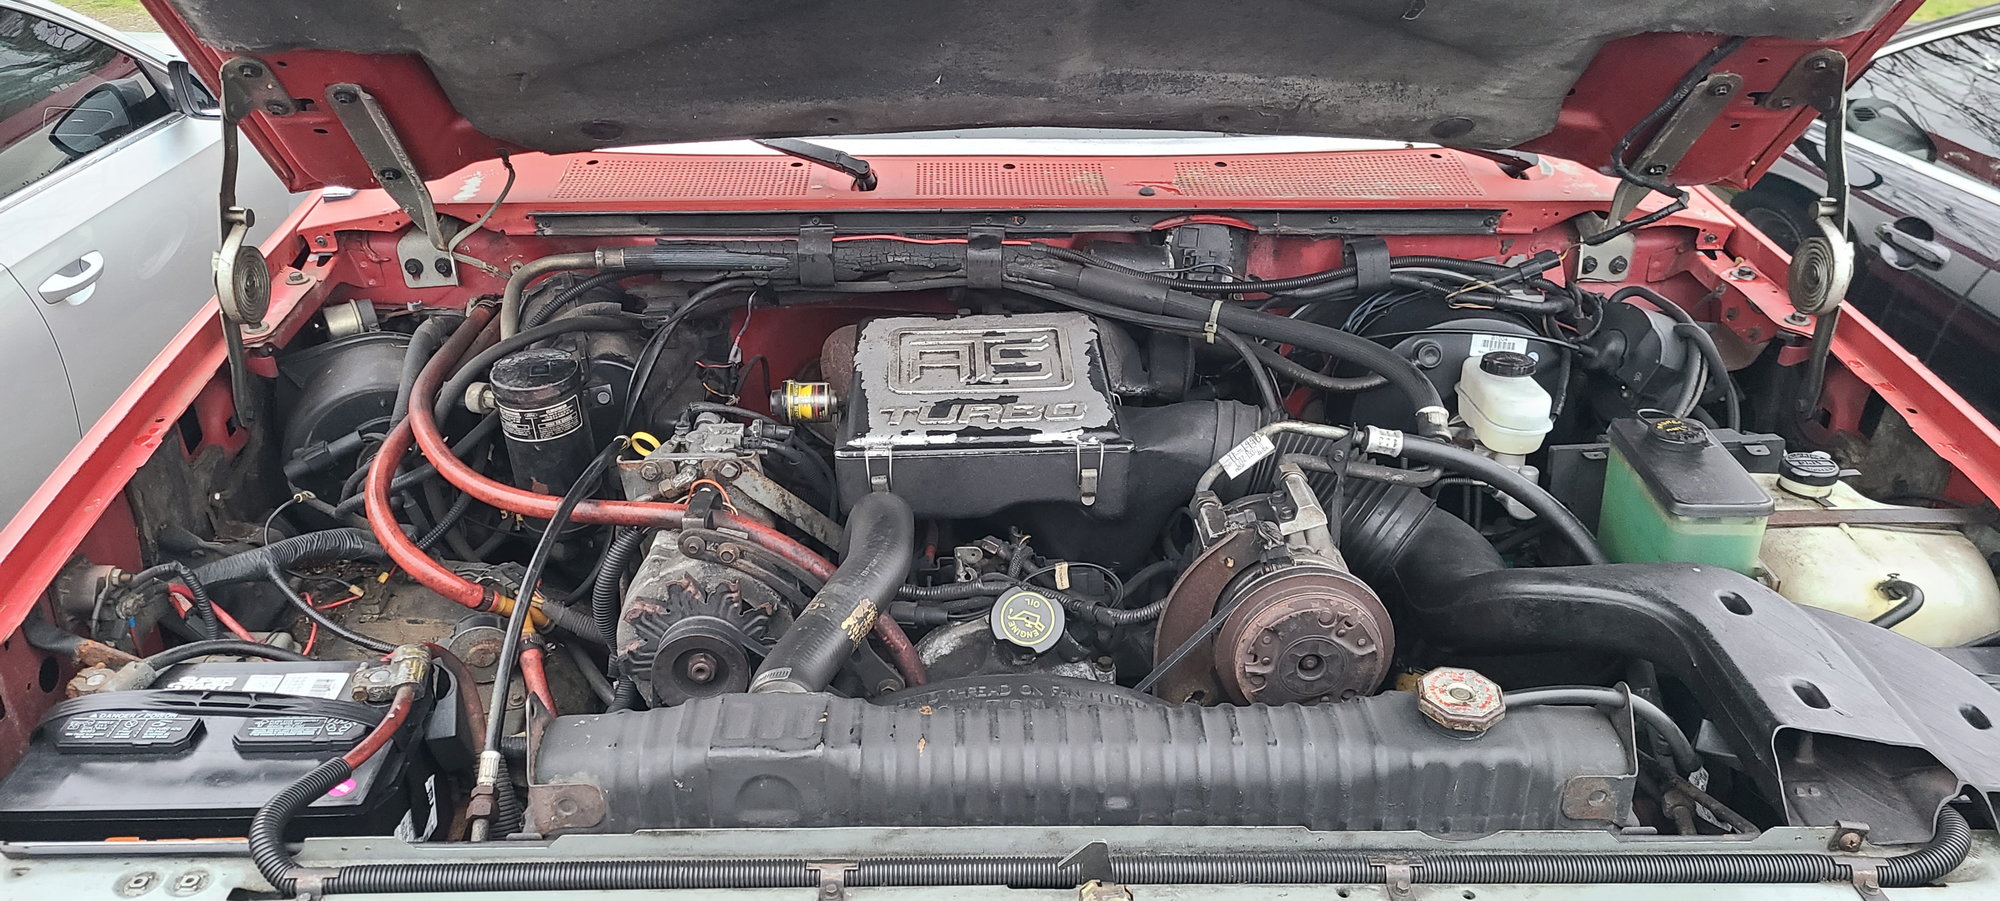 91 F250 7.3 idi with ATS turbo? - Ford Truck Enthusiasts Forums